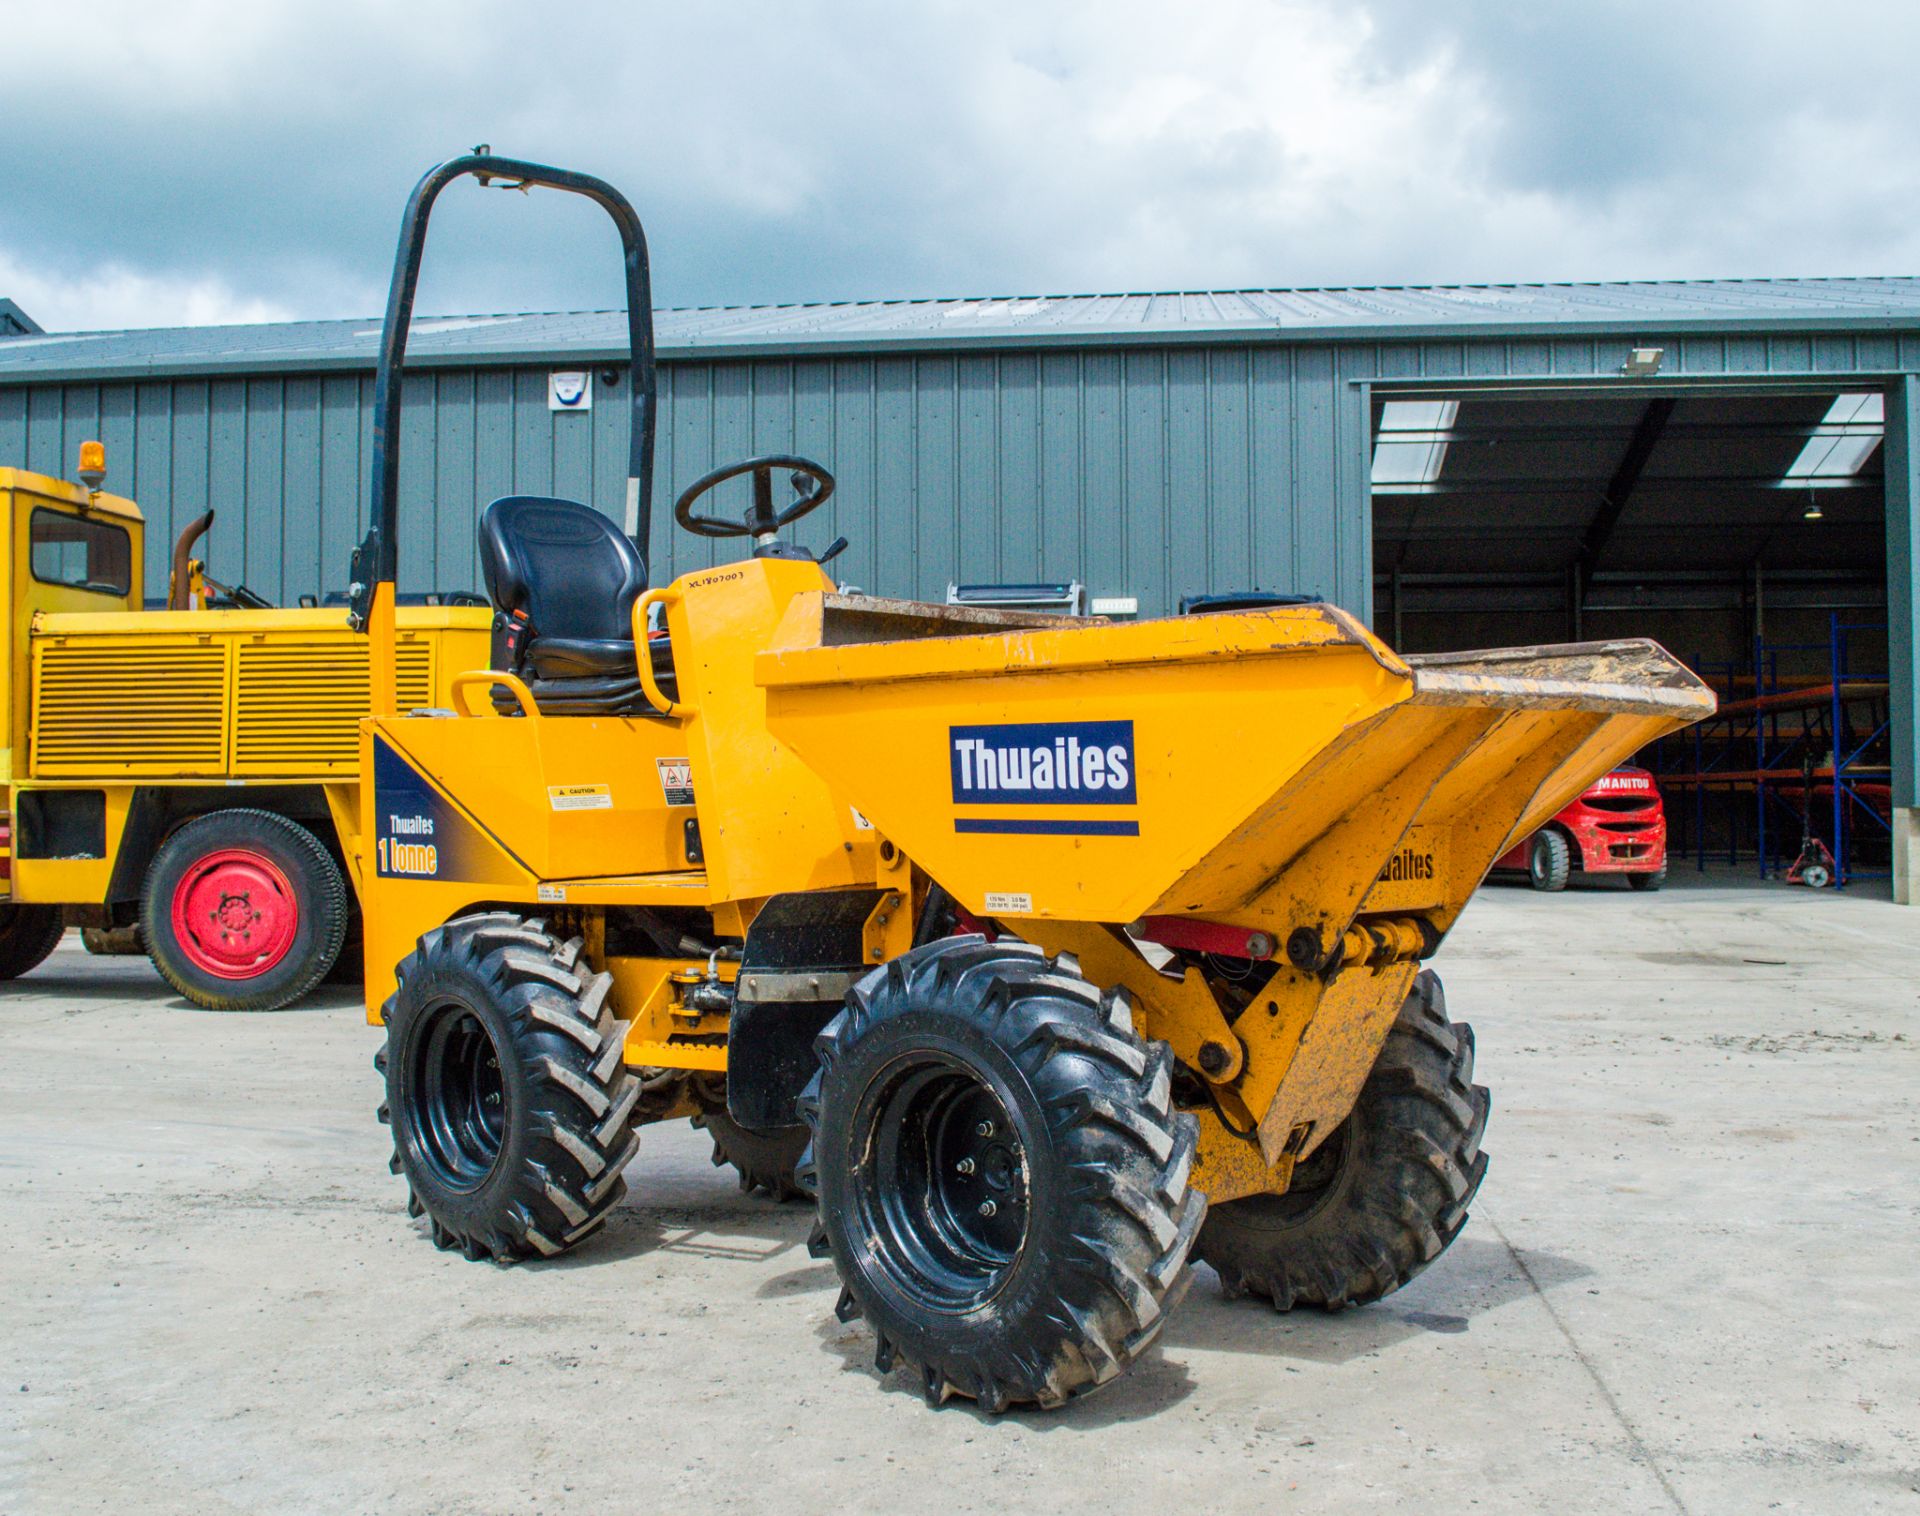 Thwaites 1 tonne high tip dumper Year: 2018 S/N: E3649 Recorded hours: 441 XL187003 - Image 2 of 21